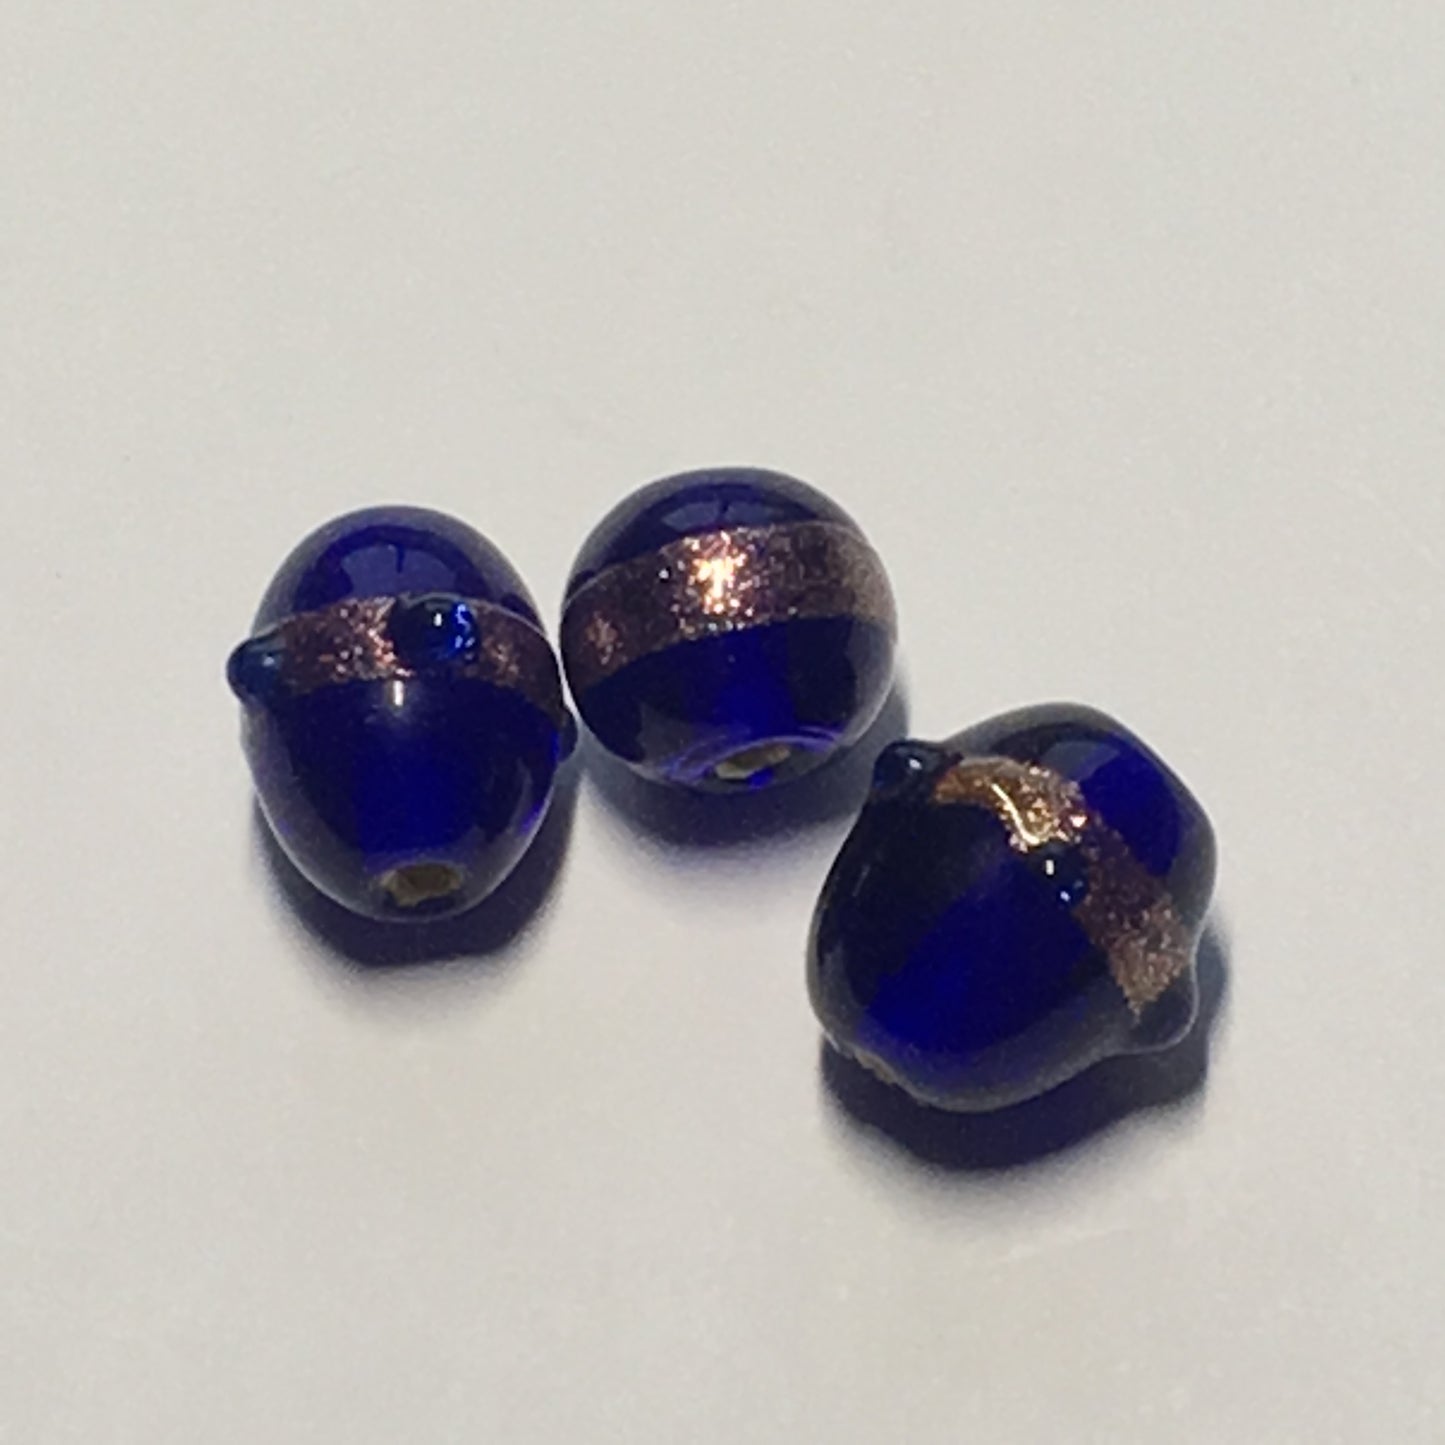 Transparent Cobalt Blue Lampwork Glass with Copper Foil Swirl, Ovals and Round, 3 Beads